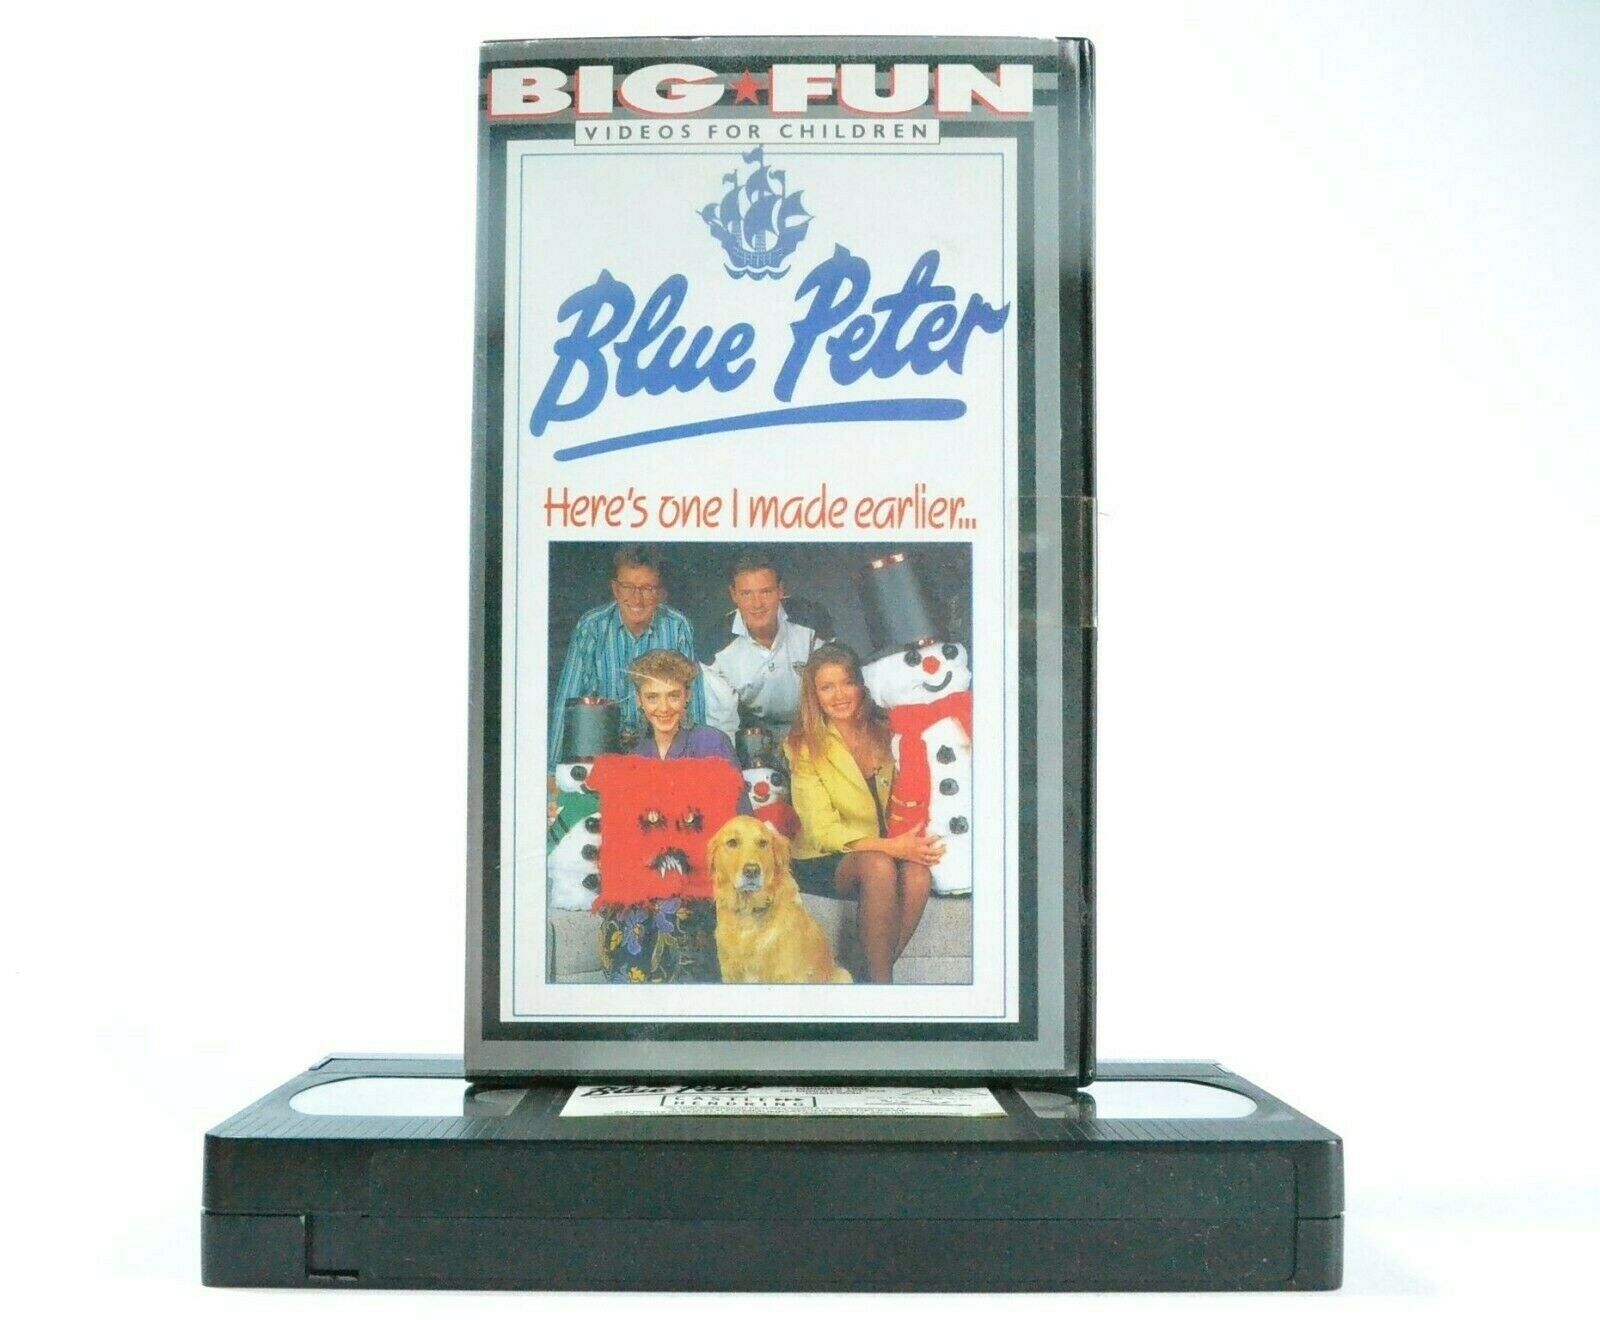 Blue Peter: Here's One I Made Earlier - British Children's Programme - Pal VHS-